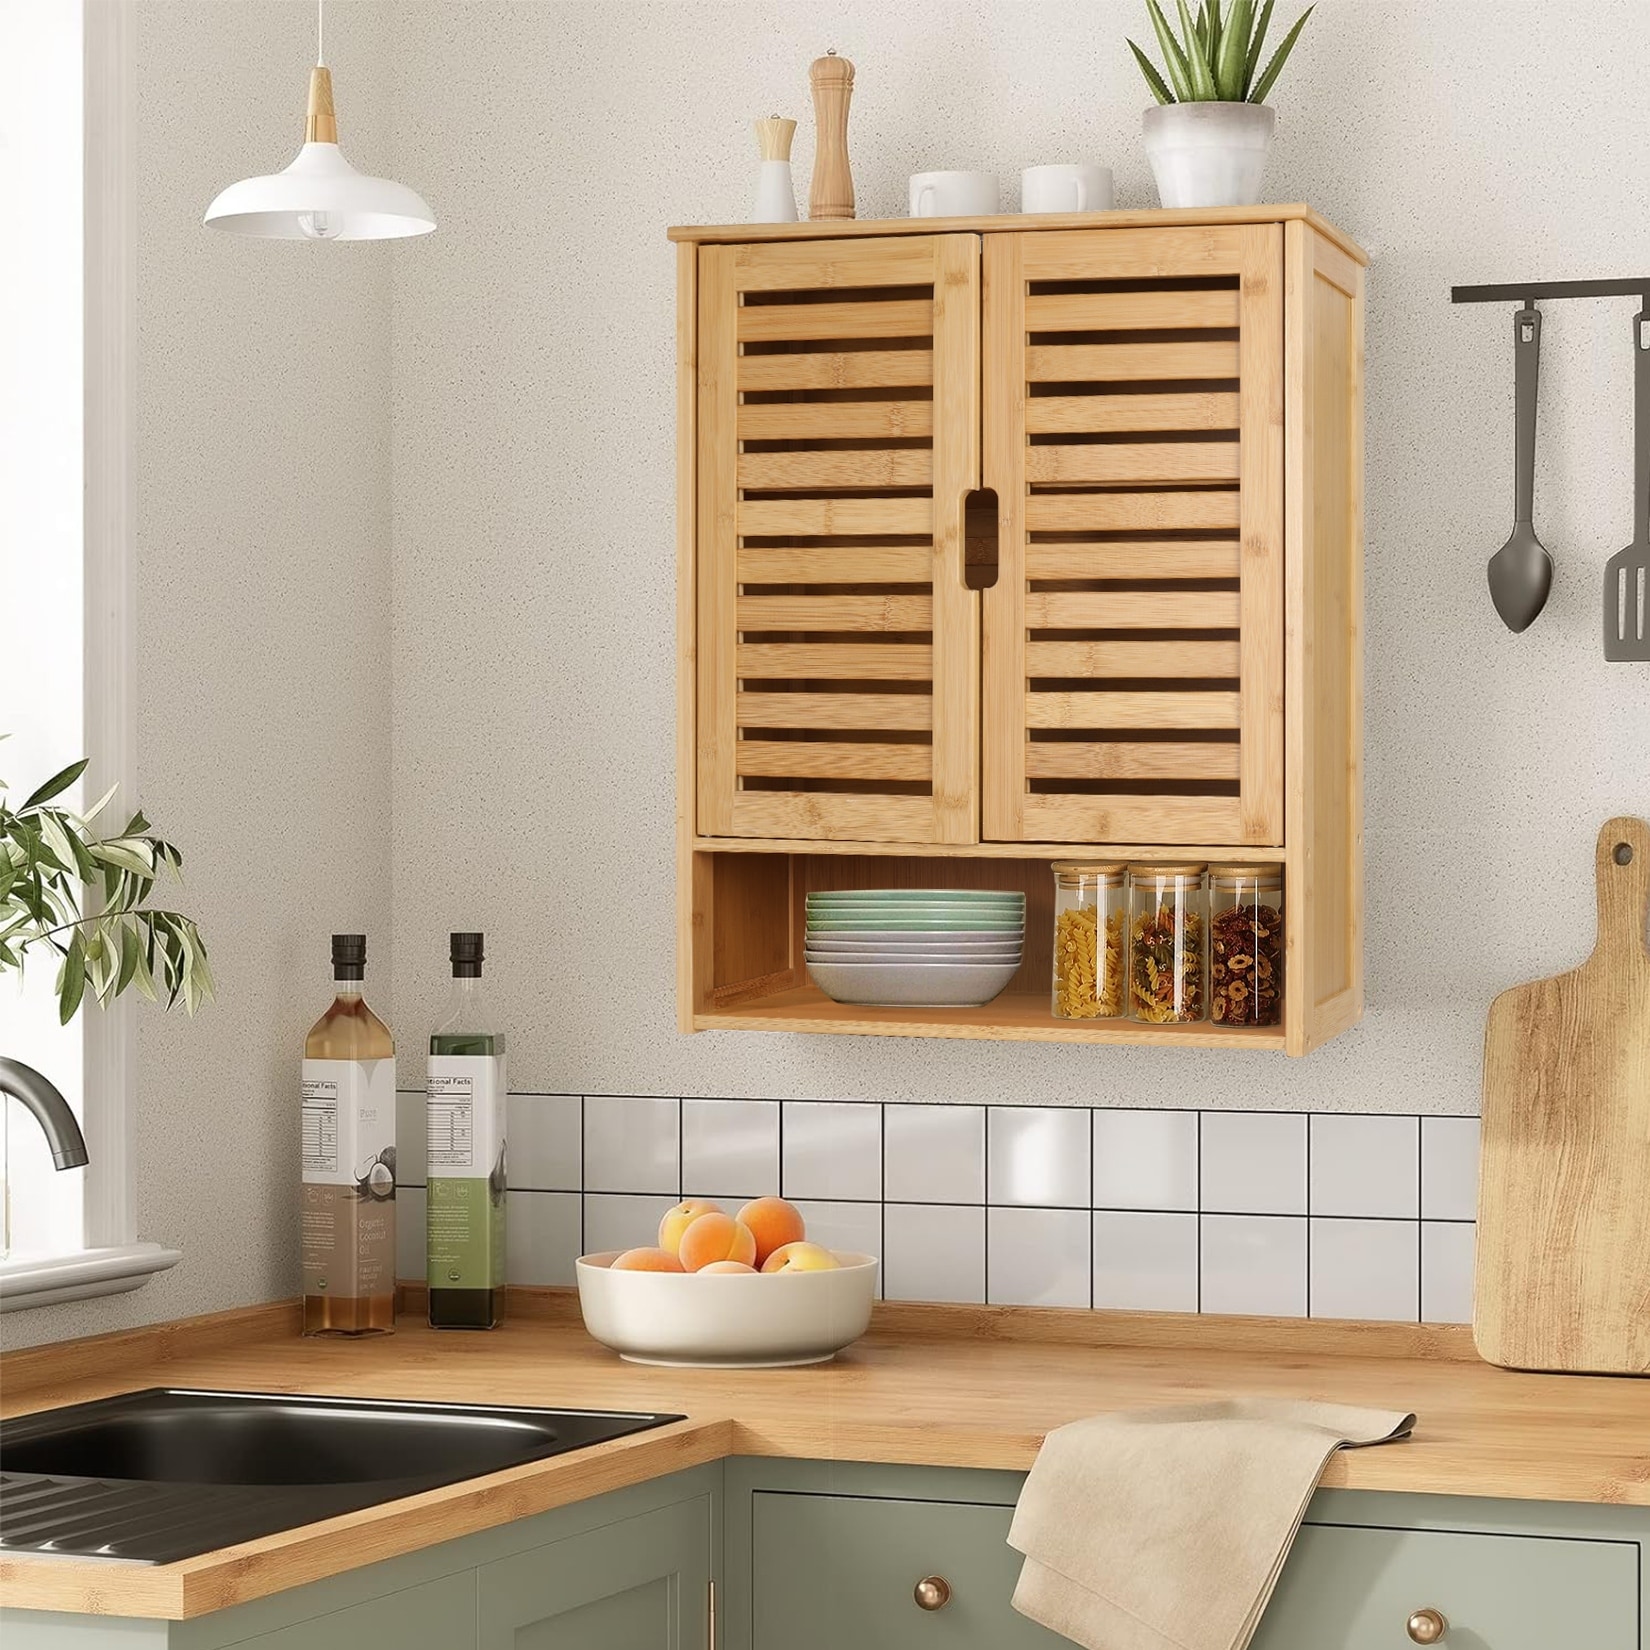 https://ak1.ostkcdn.com/images/products/is/images/direct/06282b043e0208b9938710c6fdb75735ed7038dd/Bamboo-Over-The-Toilet-Sink-Storage-Cabinet-Bathroom-Organizer.jpg